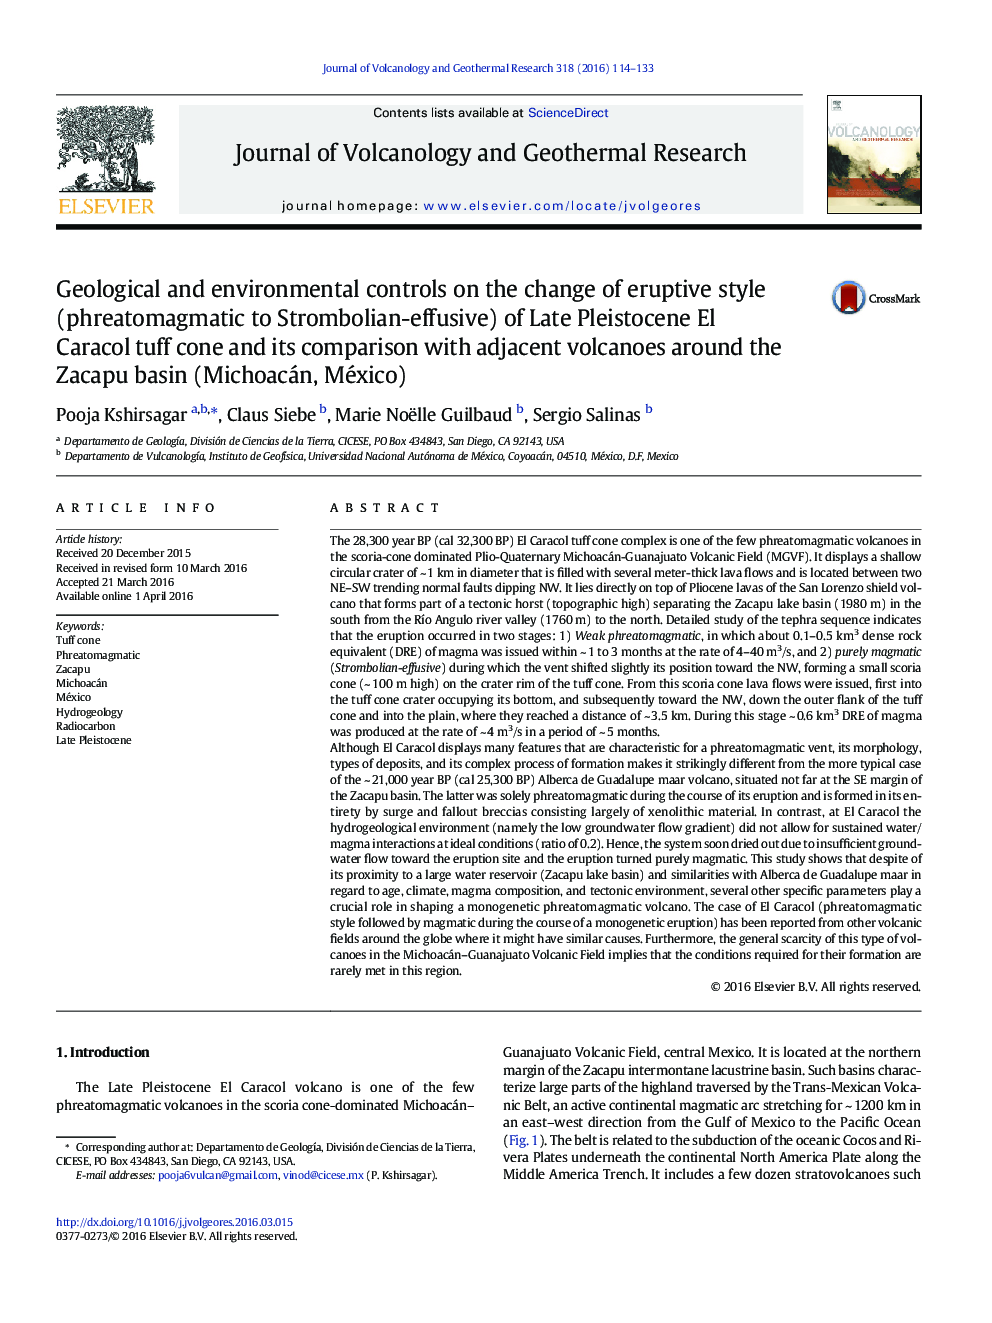 Geological and environmental controls on the change of eruptive style (phreatomagmatic to Strombolian-effusive) of Late Pleistocene El Caracol tuff cone and its comparison with adjacent volcanoes around the Zacapu basin (Michoacán, México)